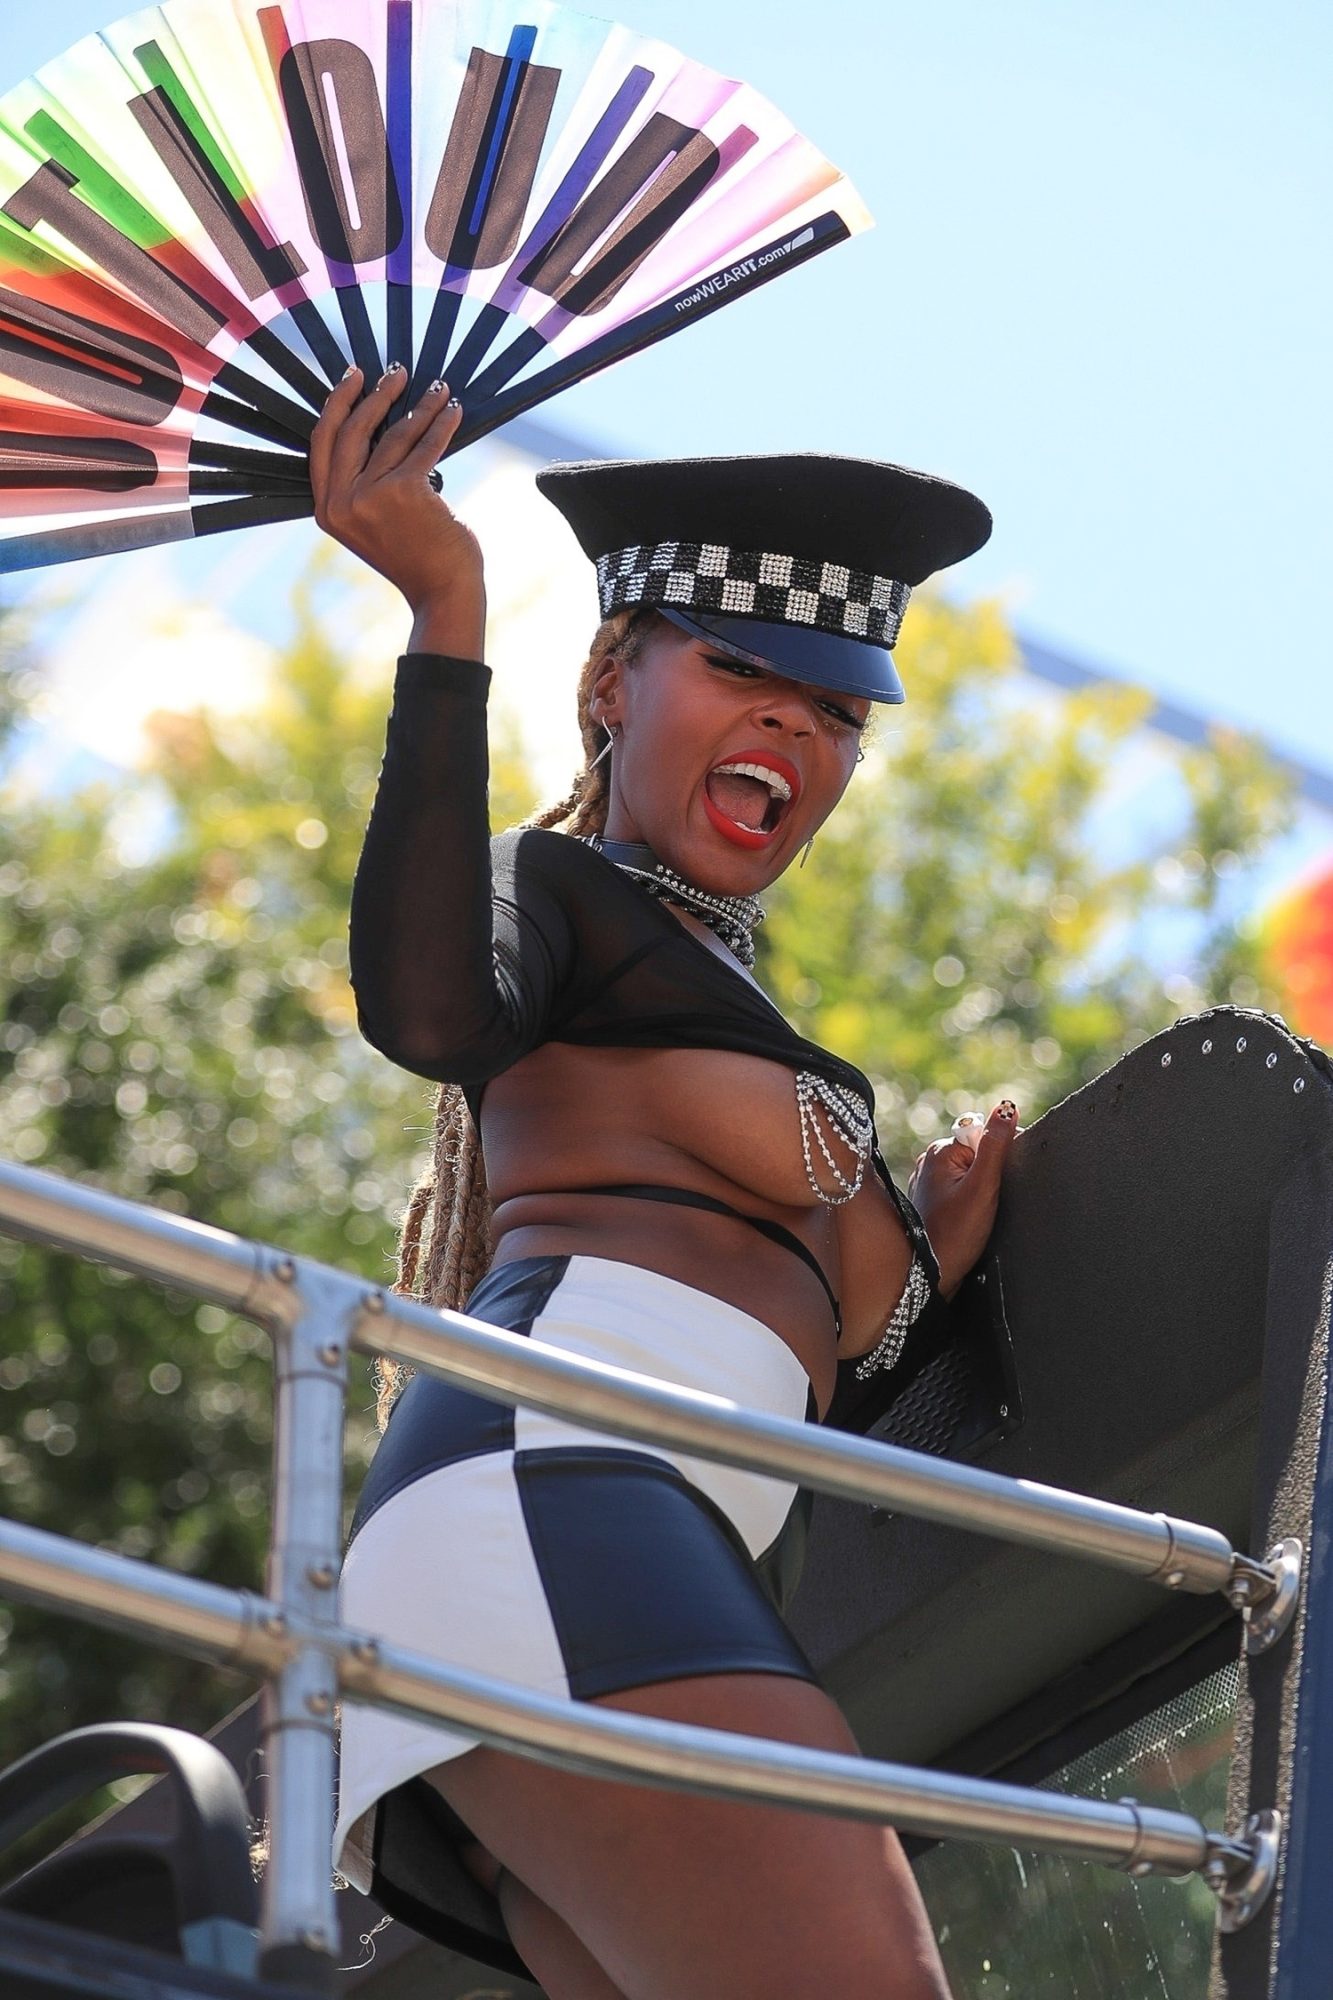 West Hollywood Gay Pride Parade Brings All The Fun and Fashion. Daily